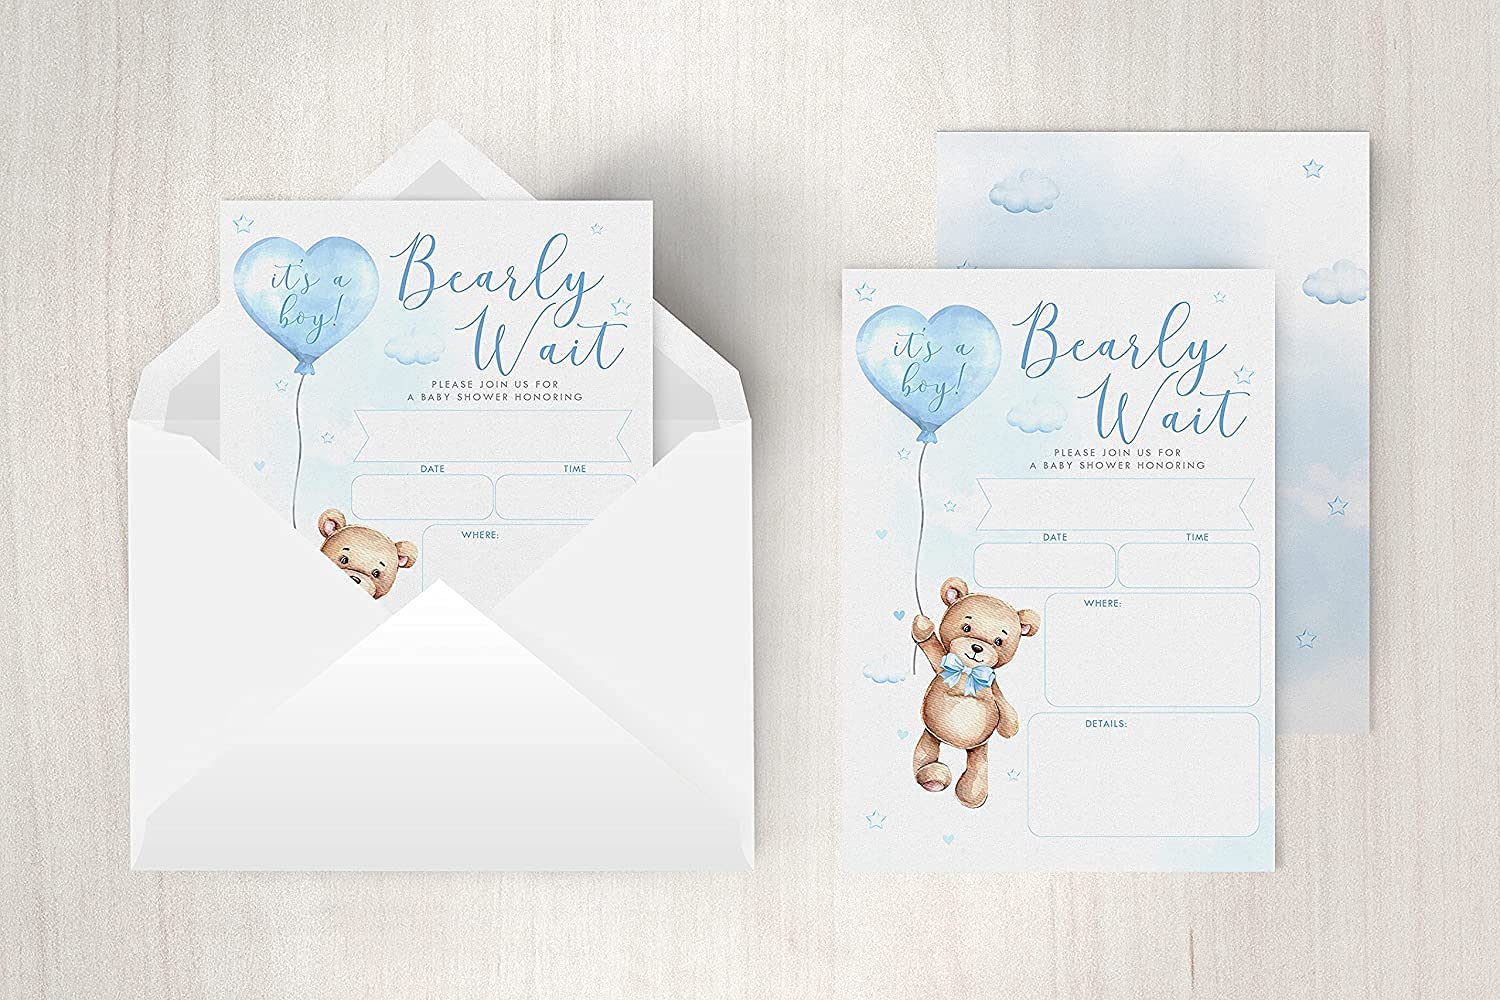 Bear Baby Shower Invitations with Book Request and Diaper Raffle Card, We Can Bearly Wait Teddy, Forest Animal, Baby Sprinkle, 20 Fill in Invites